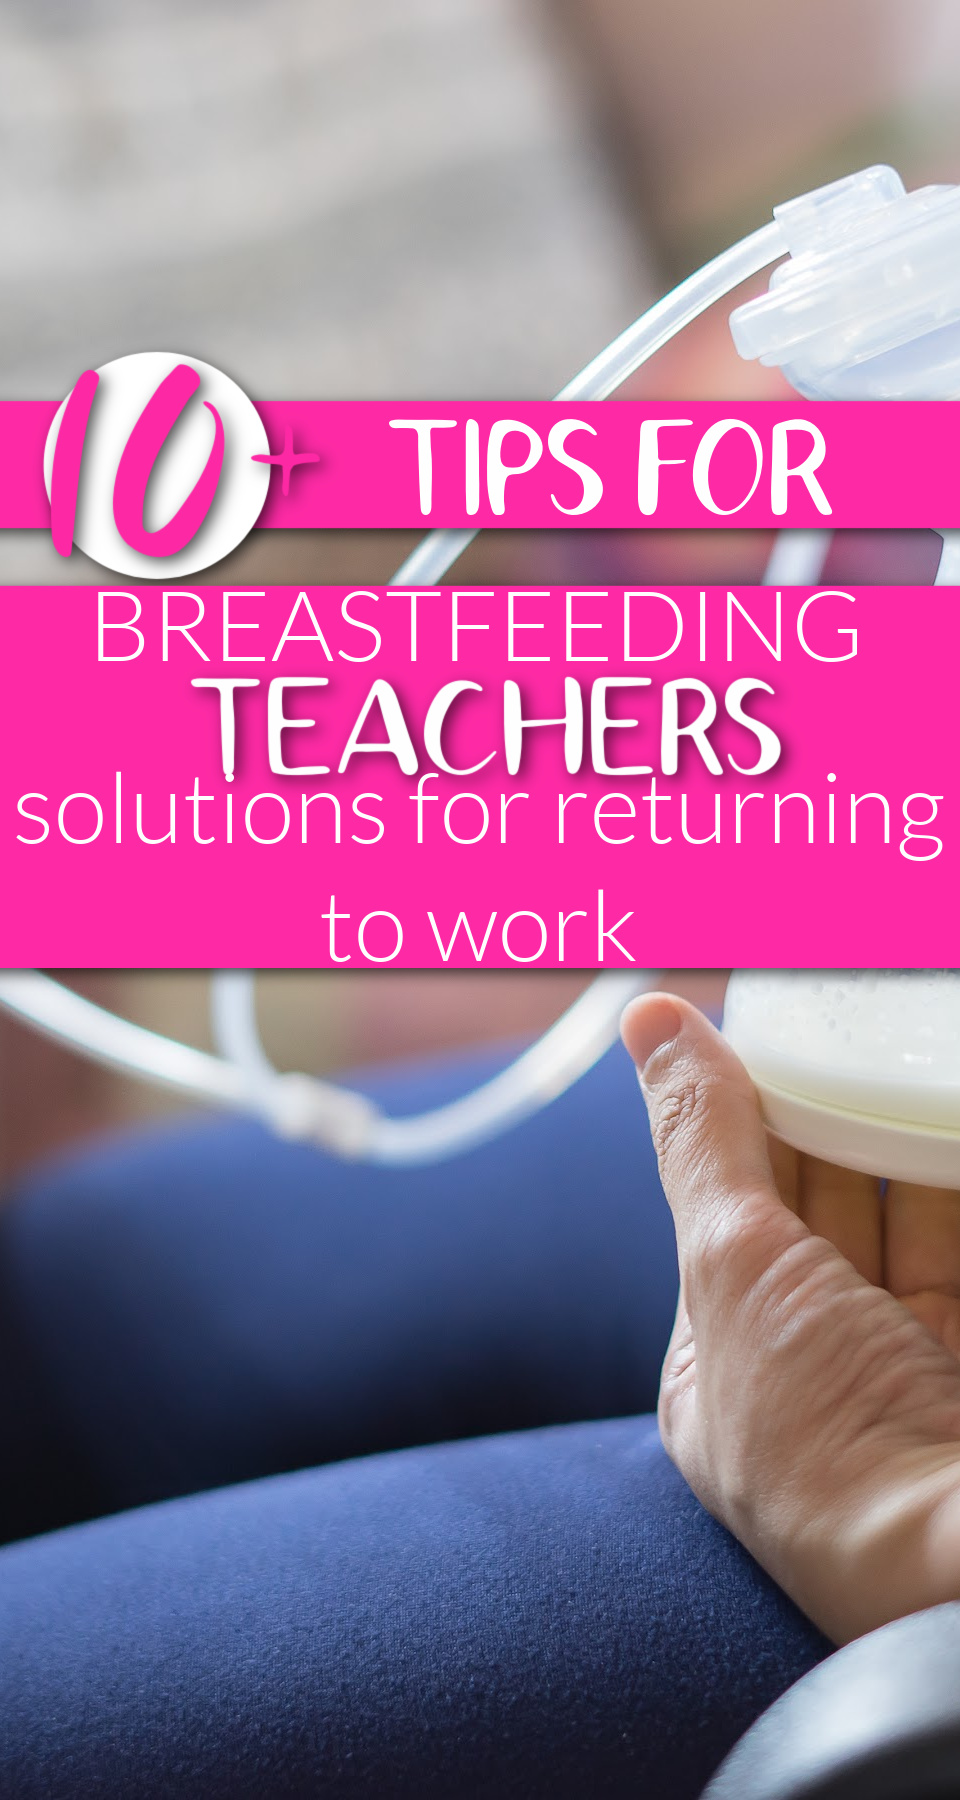 Many moms who are teachers worry about how to go back to work after having a baby. Not only do new mothers have the stress of figuring out how they will get their milk expressed, but also know that they will be away from their child for eight hours or more. This article is meant to provide tips and tricks for breastfeeding teachers who are returning to work in order to make it easier!